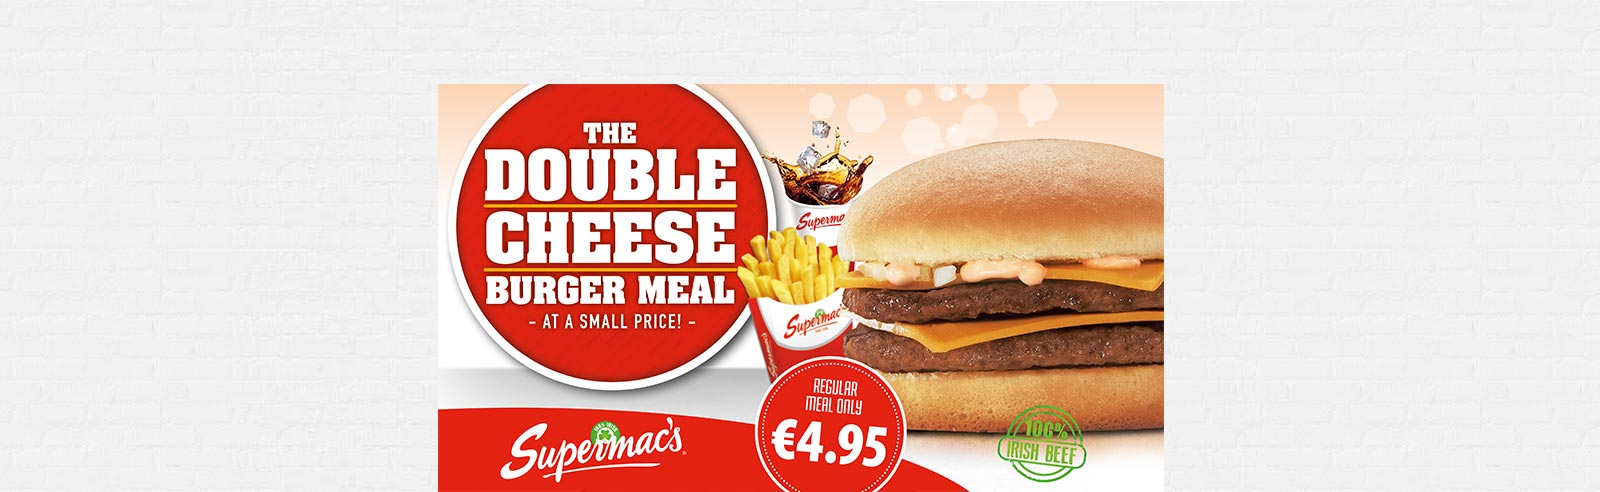 NEW Double Cheese Burger